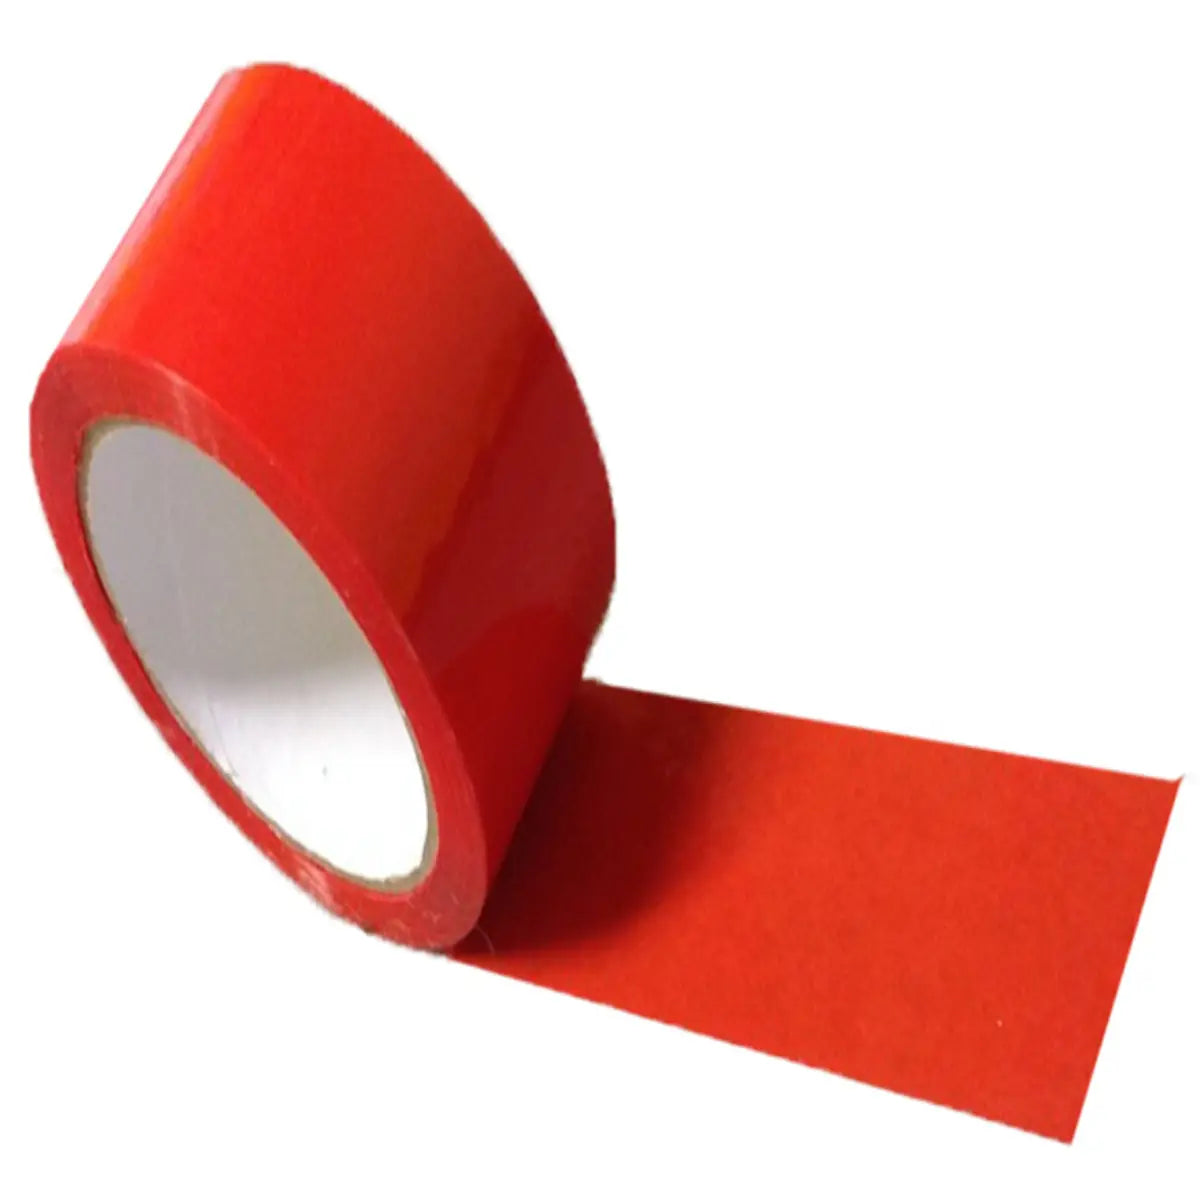 coloured adhesive tape - red